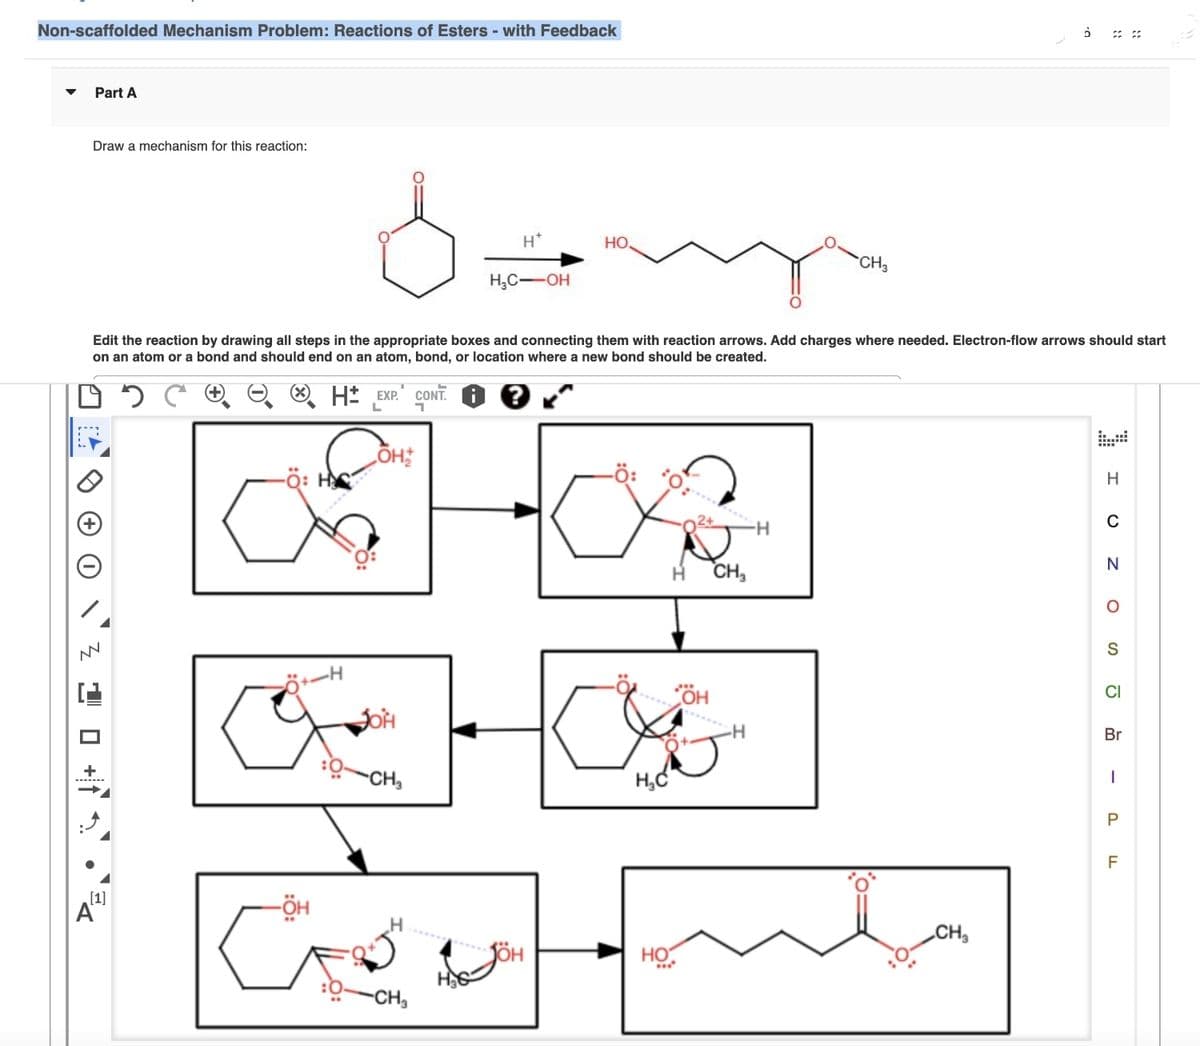 Non-scaffolded Mechanism Problem: Reactions of Esters - with Feedback
Part A
Draw a mechanism for this reaction:
دو
W
-
Edit the reaction by drawing all steps in the appropriate boxes and connecting them with reaction arrows. Add charges where needed. Electron-flow arrows should start
on an atom or a bond and should end on an atom, bond, or location where a new bond should be created.
[1]
-Ö:
في
H* EXP. CONT.
L
-ÖH
.H
ÕH,*/*
JOH
-CH
السلام المان
H*
HC-OH
H
QCH
HO.
:ة-
:0:
H₂C
H
HO
m
SH
CH₂
.H
CH3
H
ملہ
0.
CH₂
I
C
N
0
S
ة
Br
ا
P
F
LL